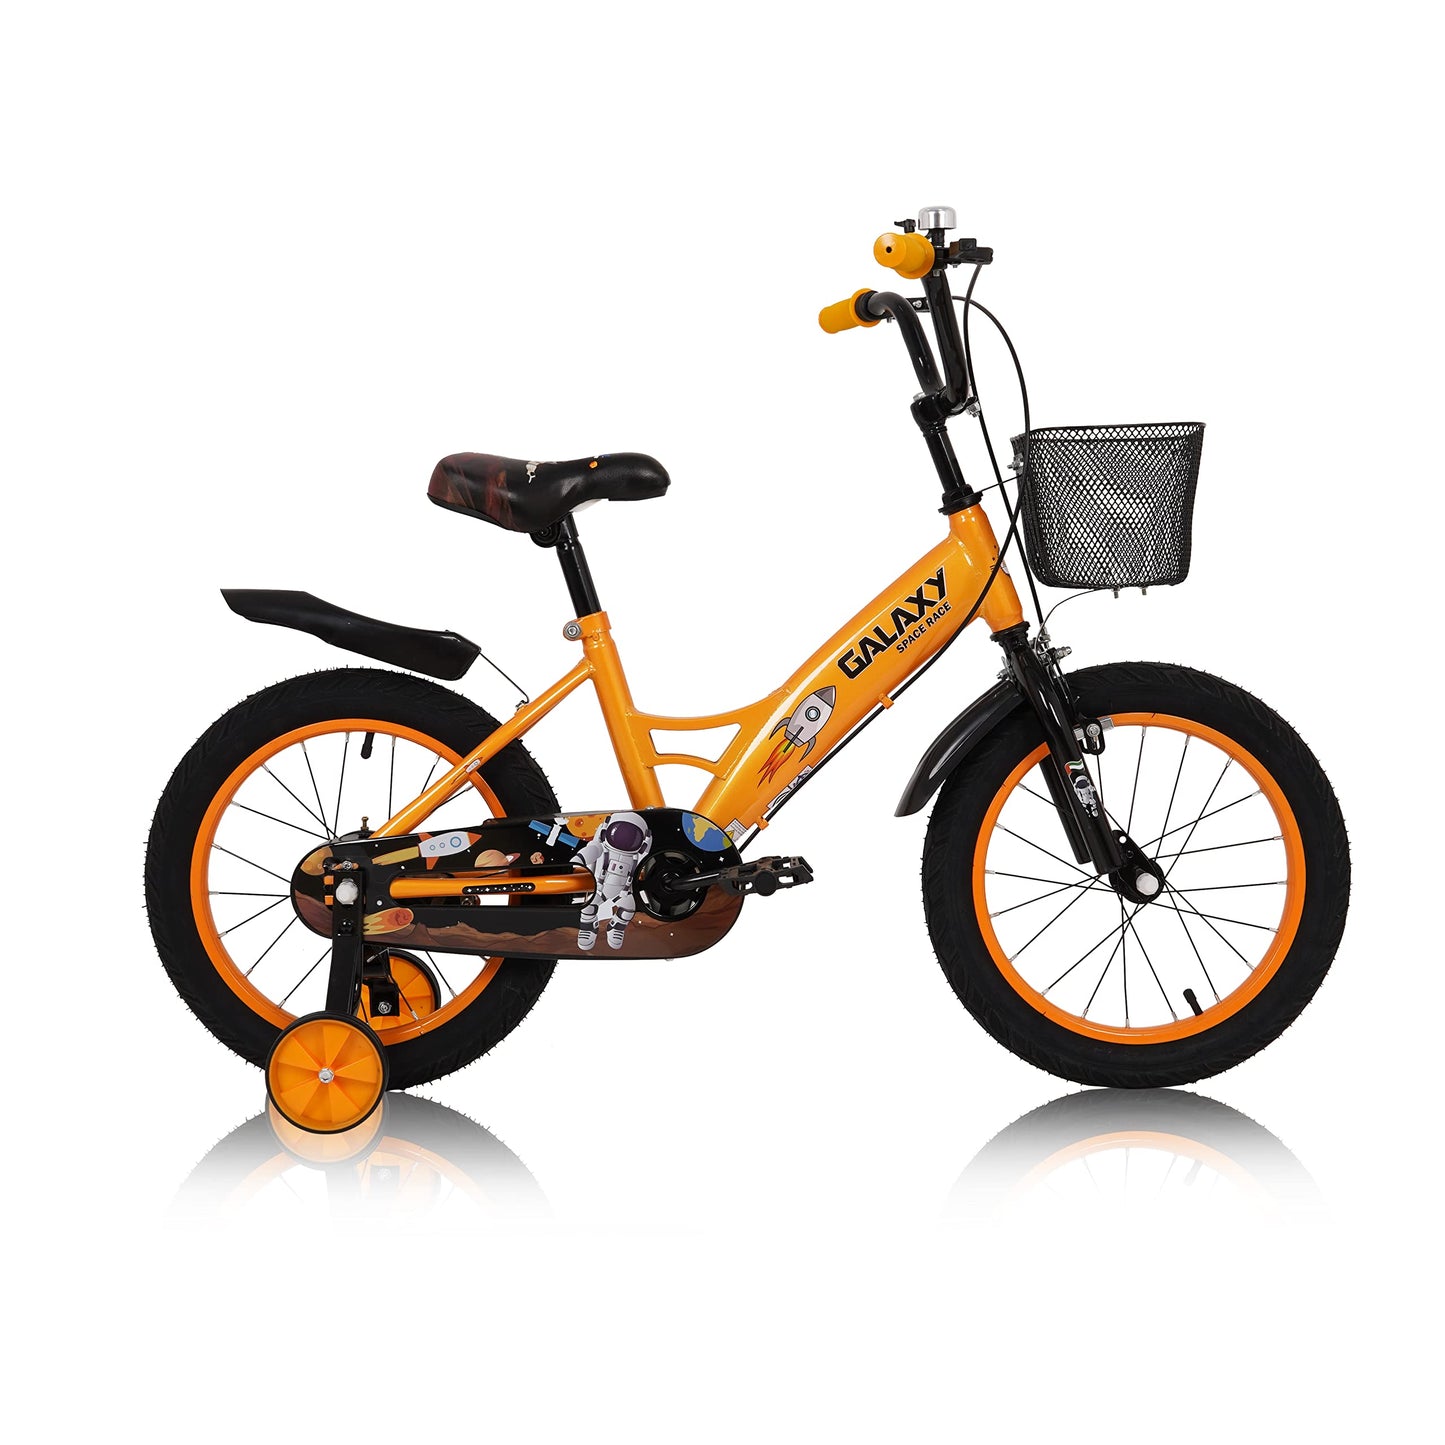 Vego Galaxy Kids Road Bike With Basket for 4-10 Years Girls & Boys, Adjustable Seat,Handbrake, Mudguards, Gift for Kids, 12/16 Inch Bicycle with Training Wheels And 20-Inch with Kickstand